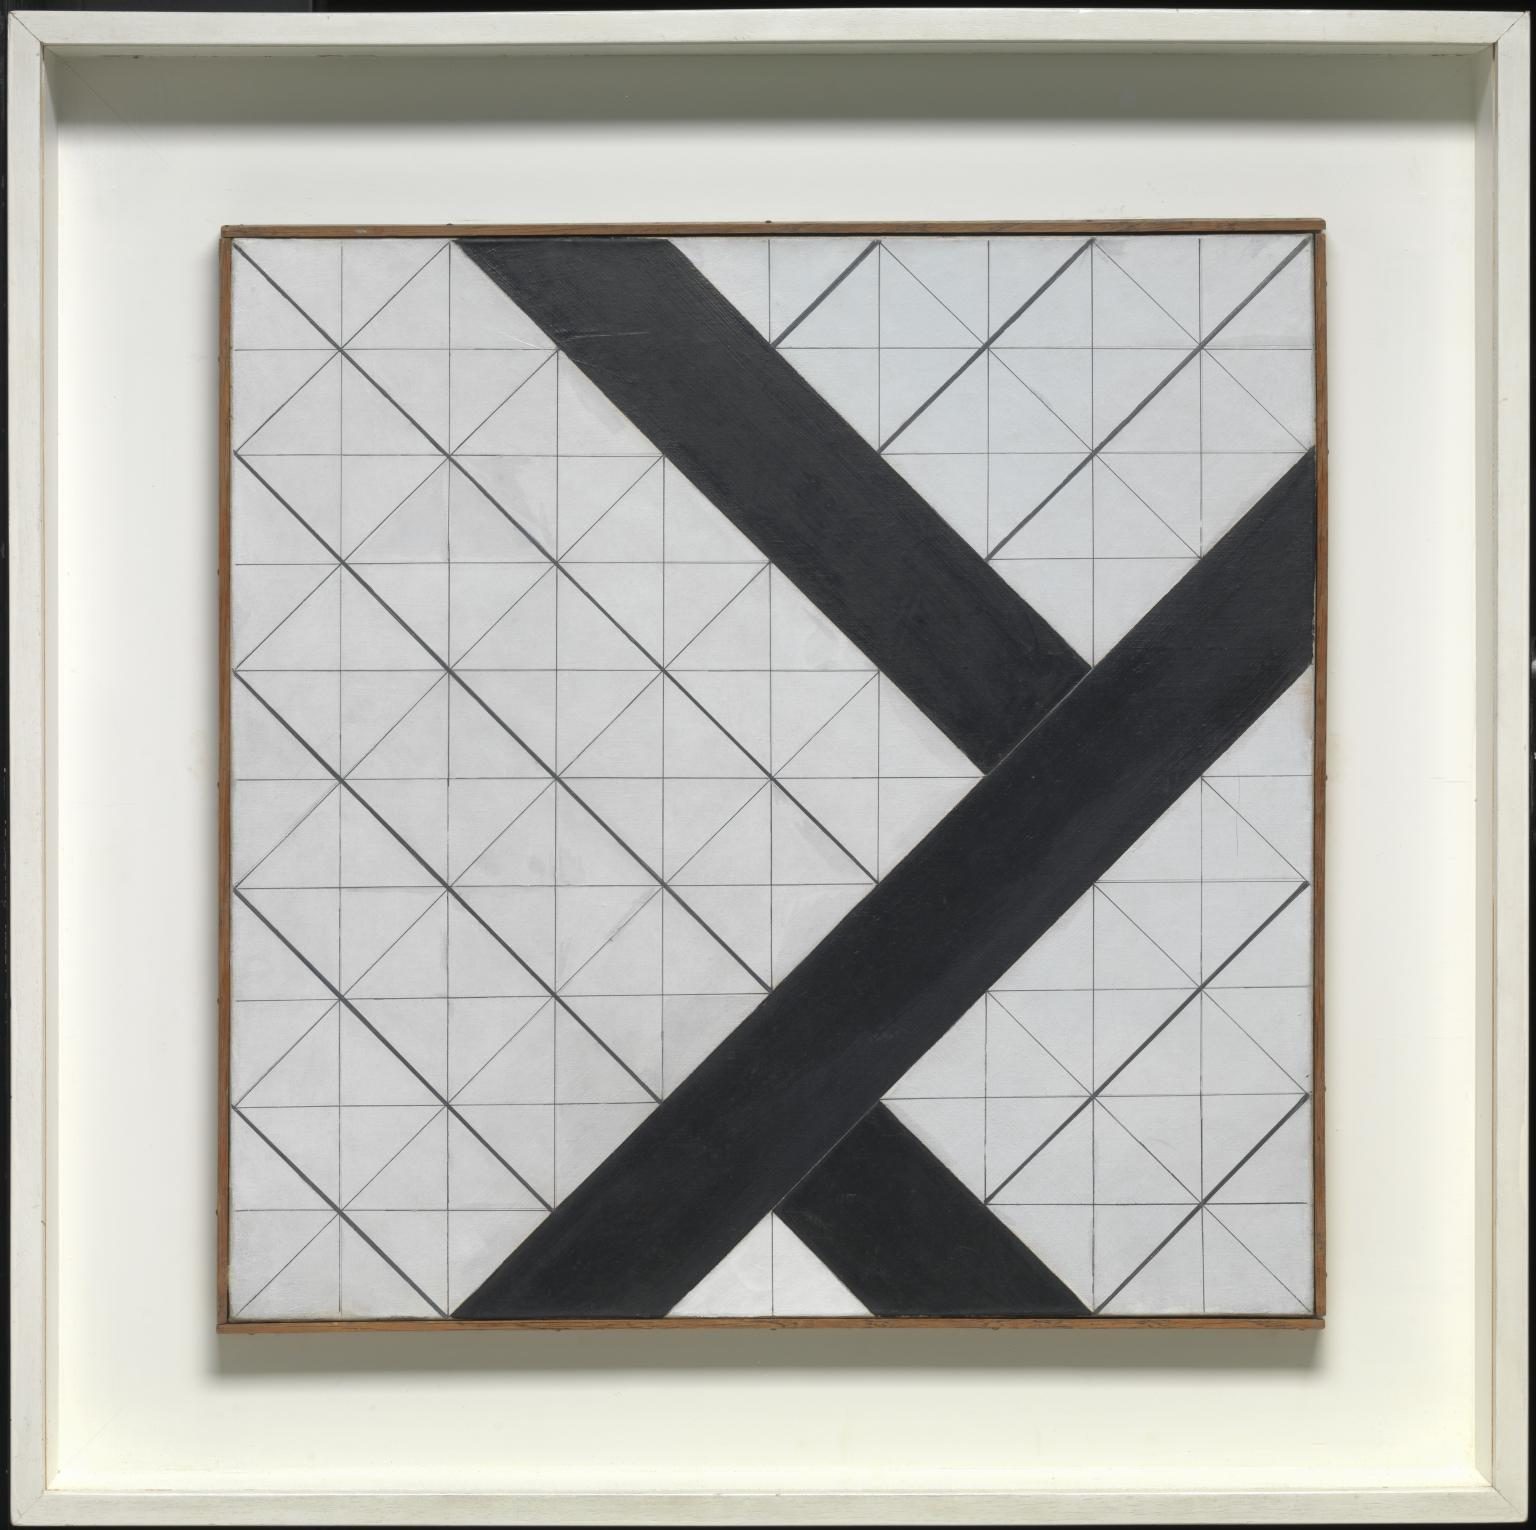 Counter-composition VI, Theo Van Doesburg, 1925